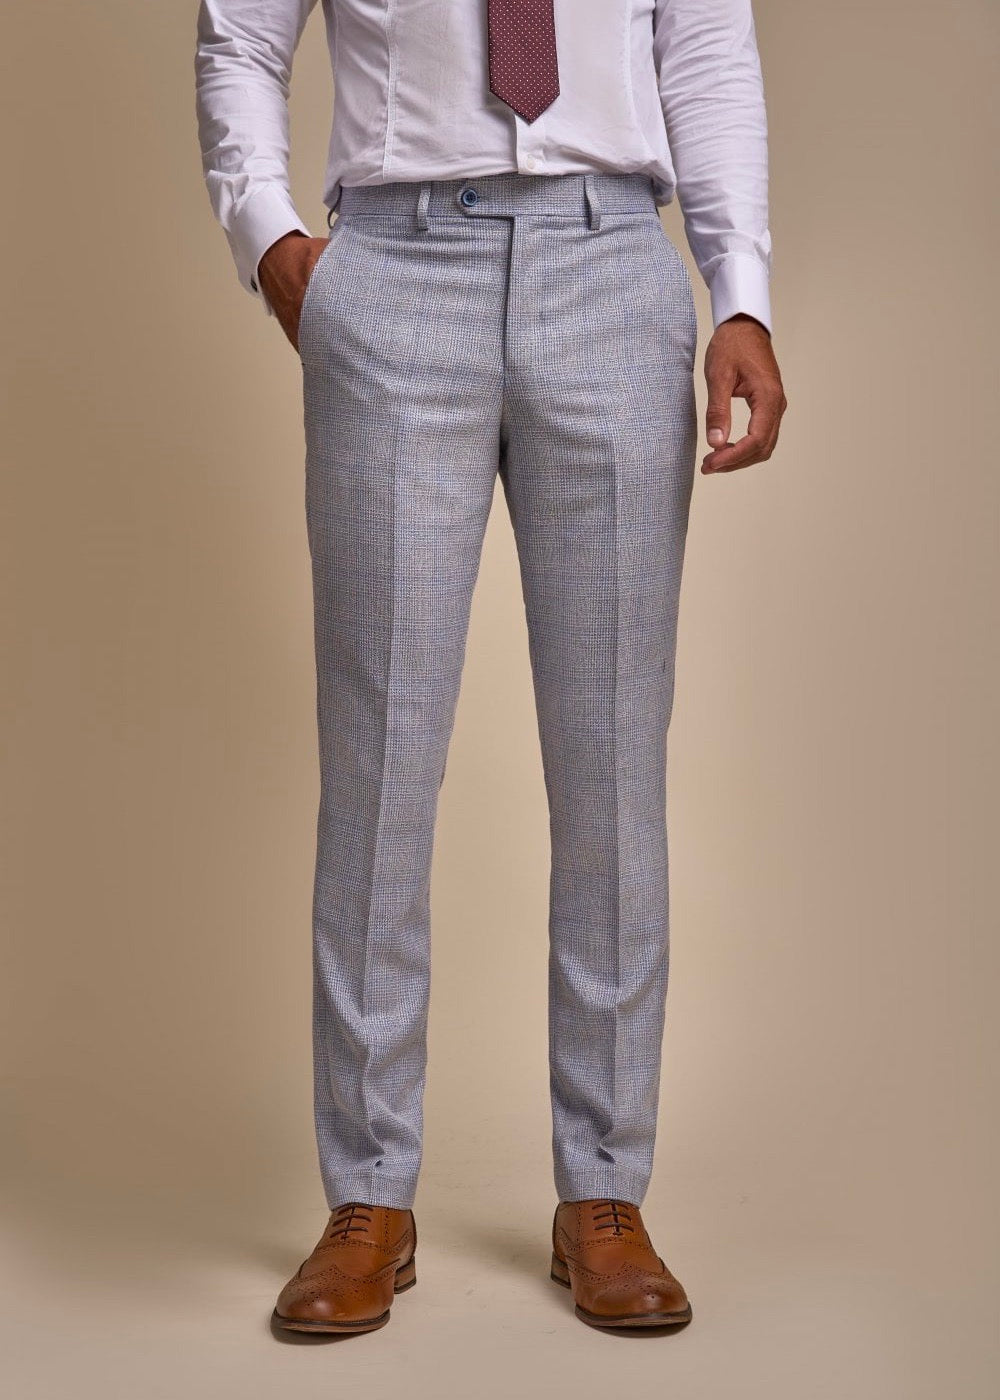 Caridi sky suit for men showing front of suit trousers.